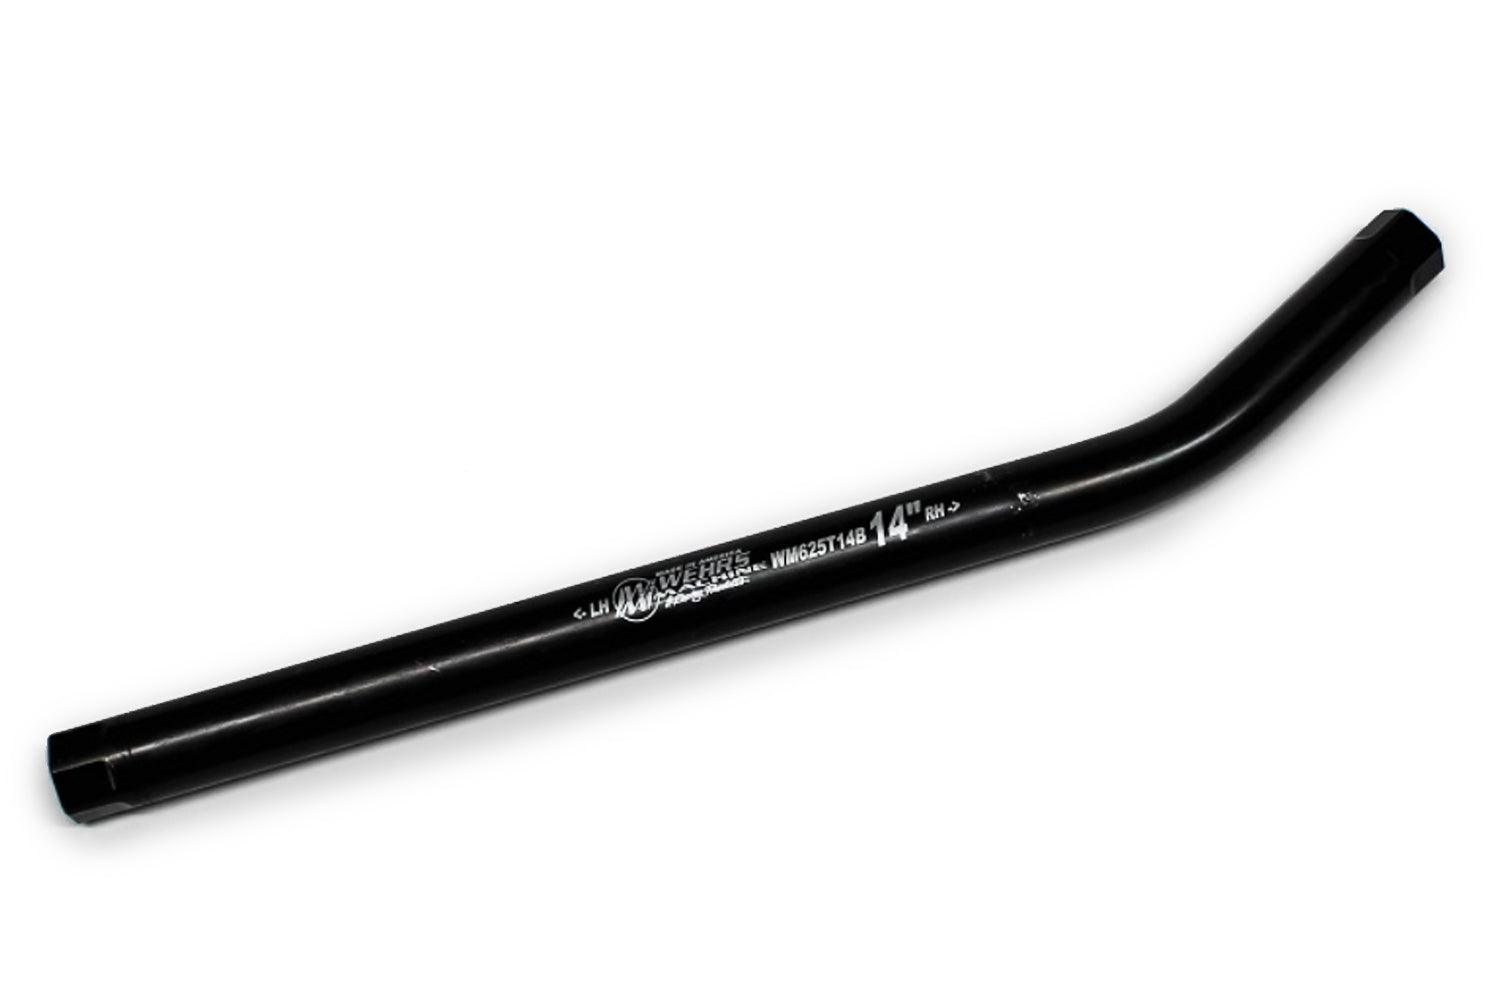 Suspension Tube 14in x 5/8-18 THD Bent - Burlile Performance Products